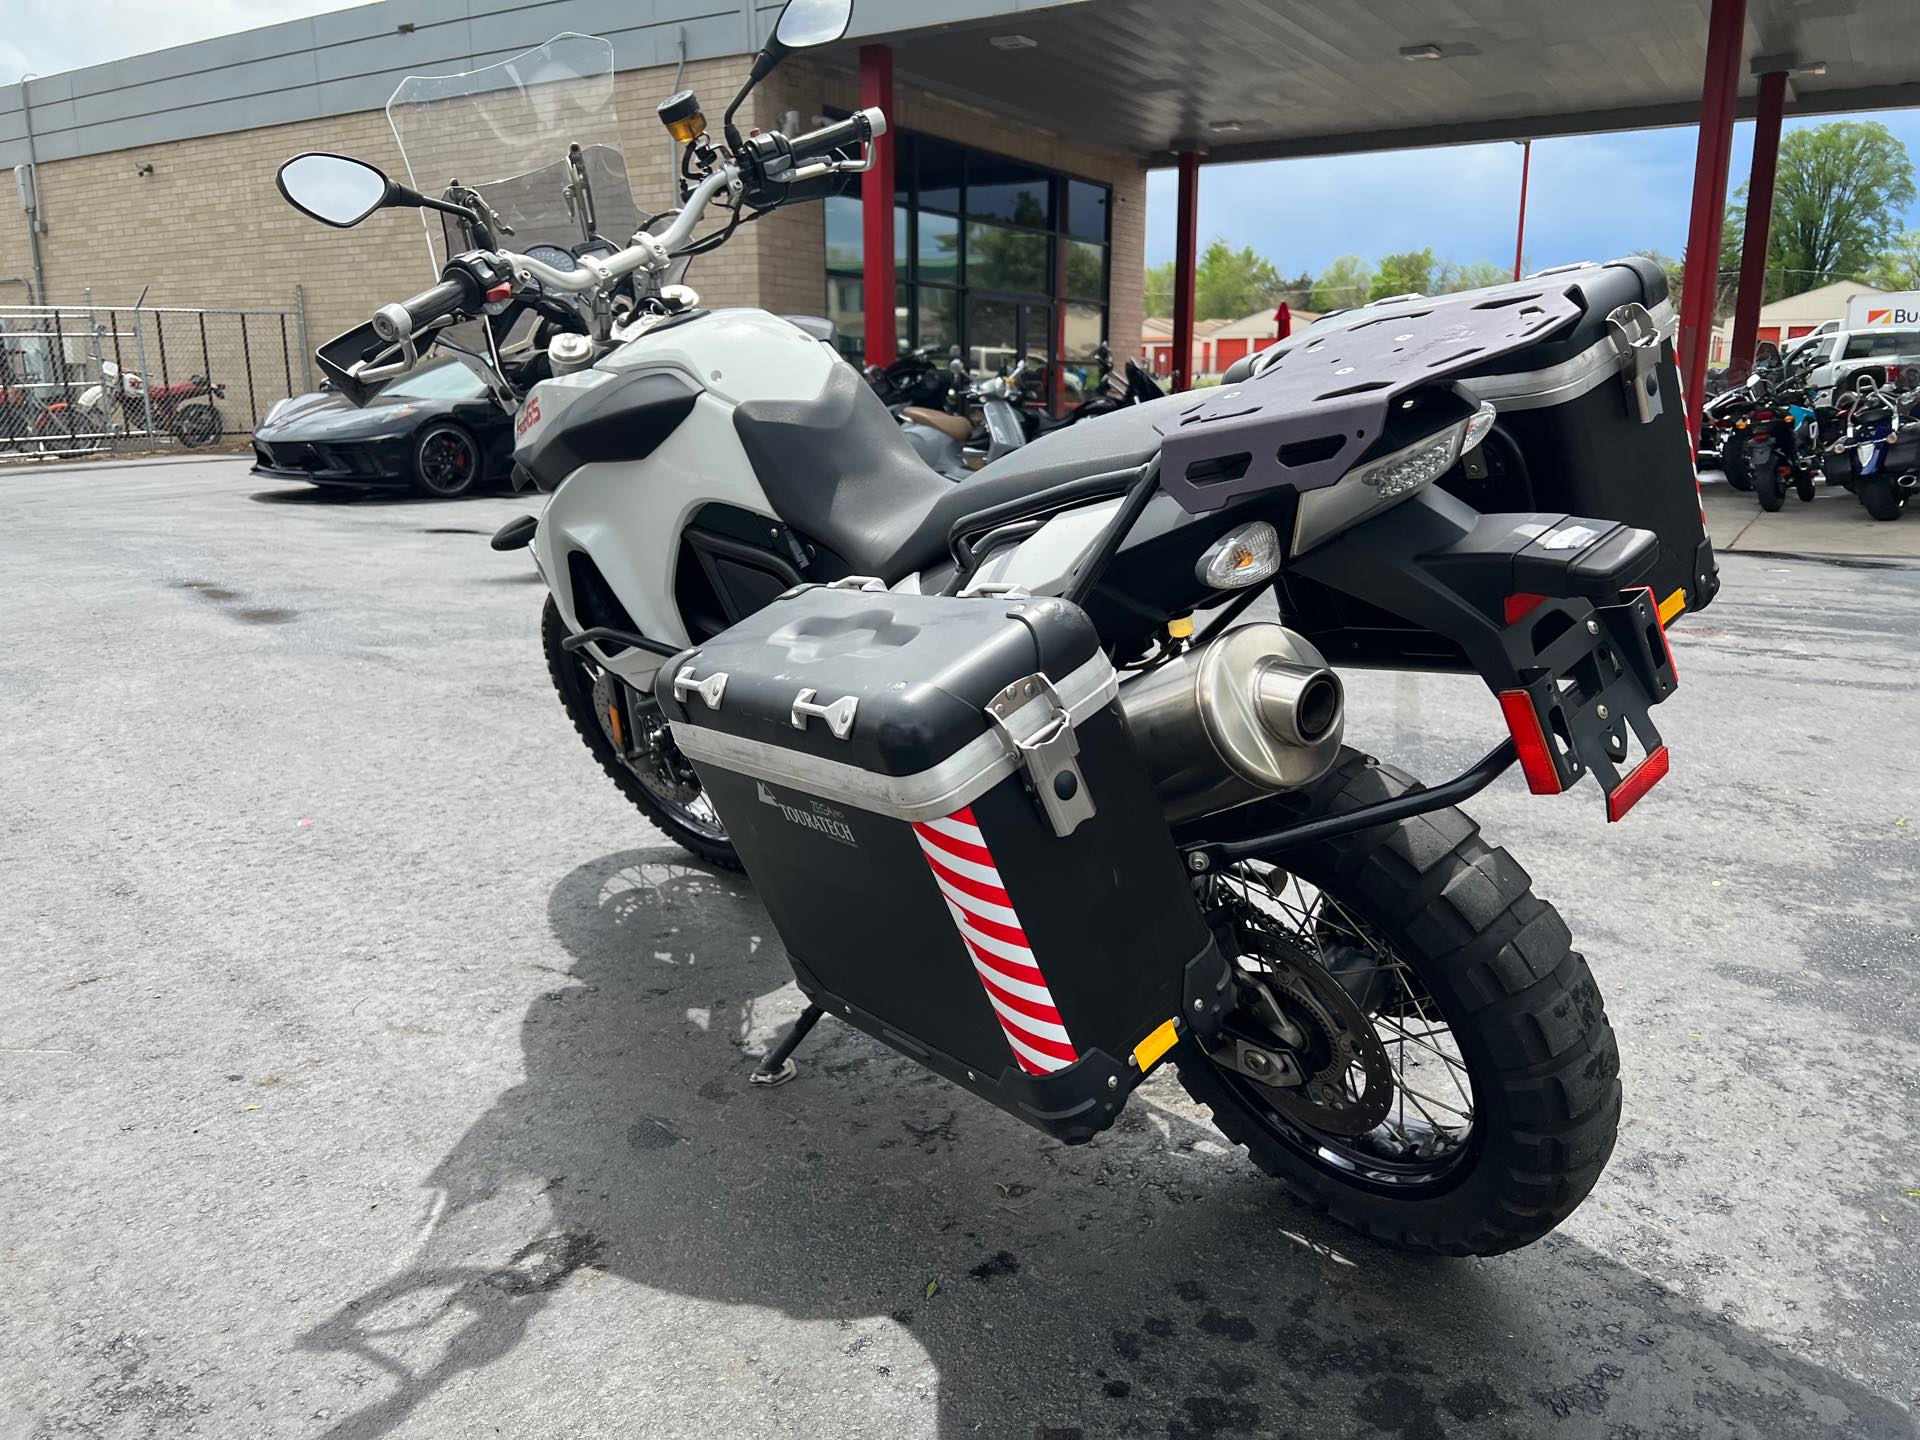 2011 BMW F 800 GS at Aces Motorcycles - Fort Collins